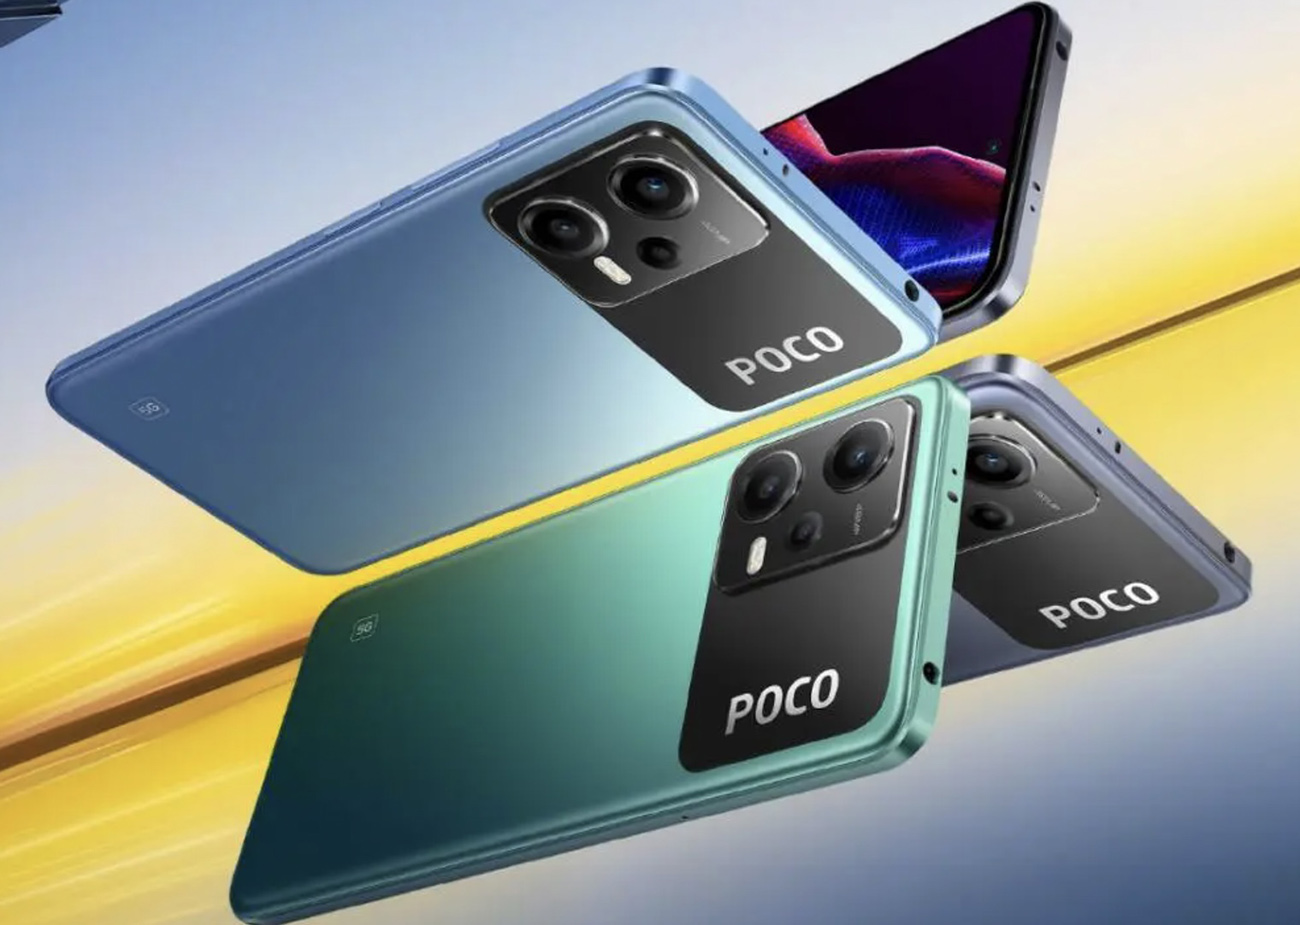 The new POCO X5 5G Pro and POCO X5 5G smartphones have been launched in Greece